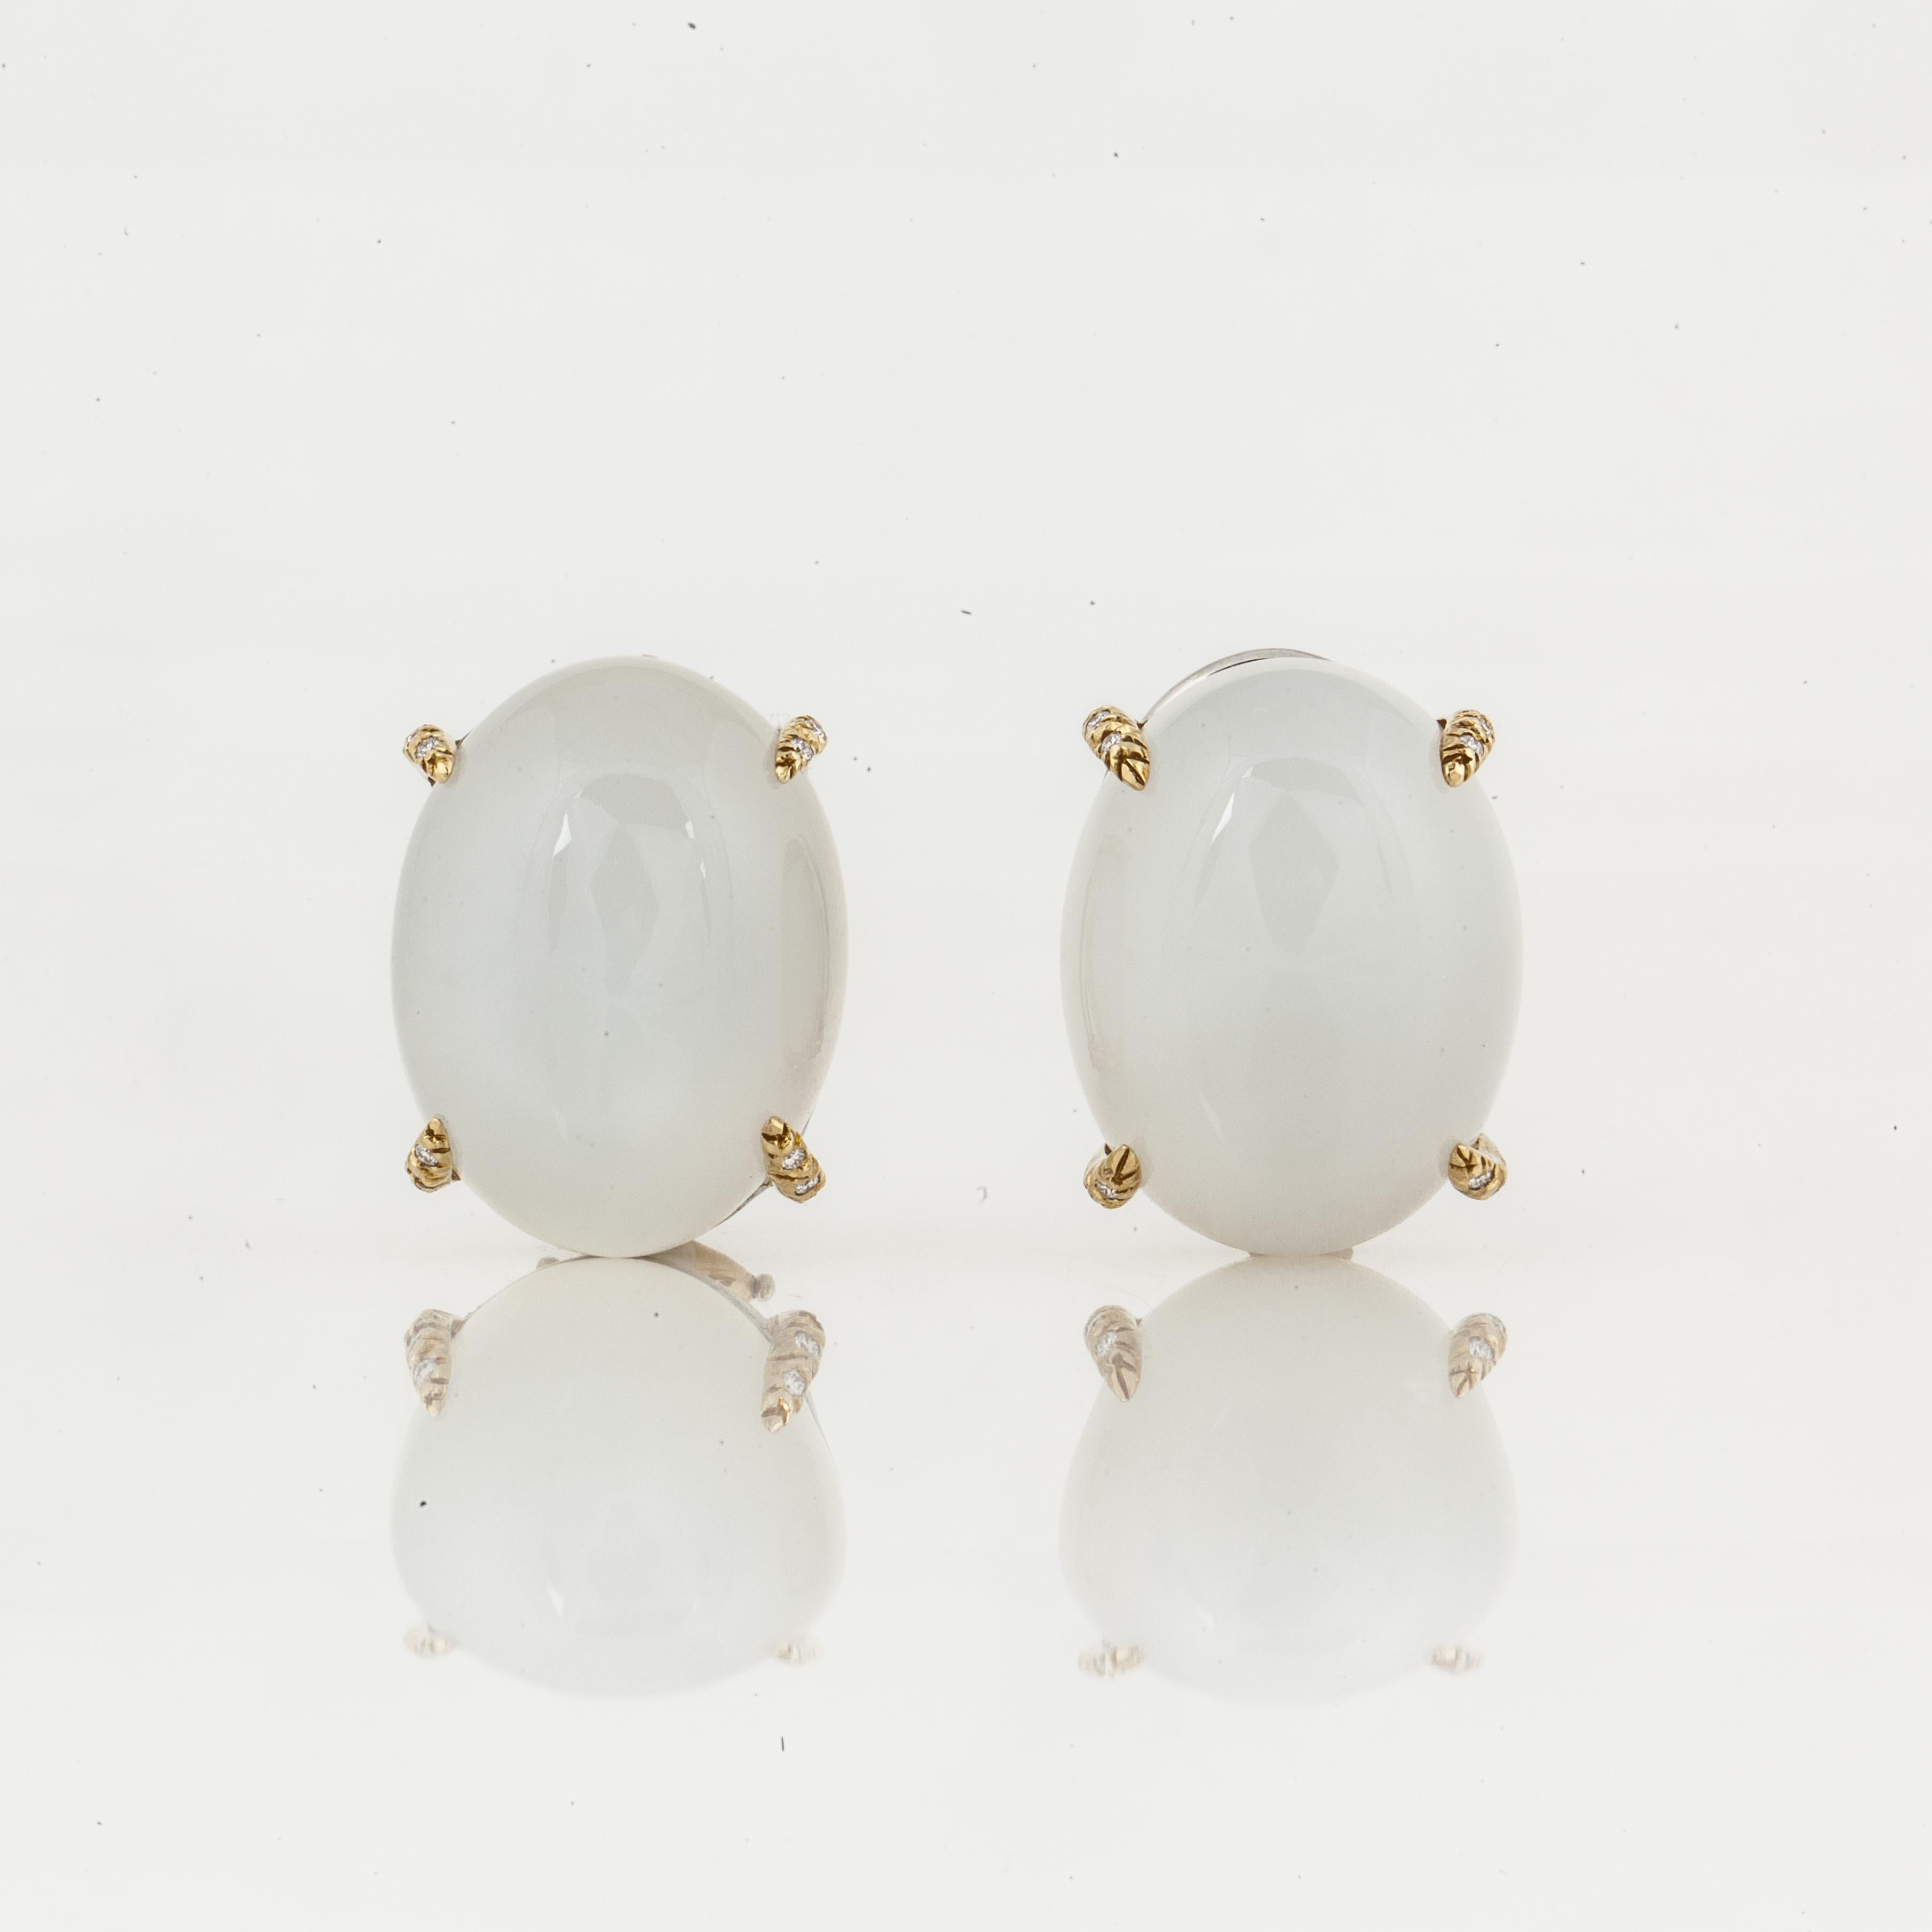 Henry Dunay earrings composed of 18K yellow gold and platinum with moonstones and diamond accents.  They are marked 